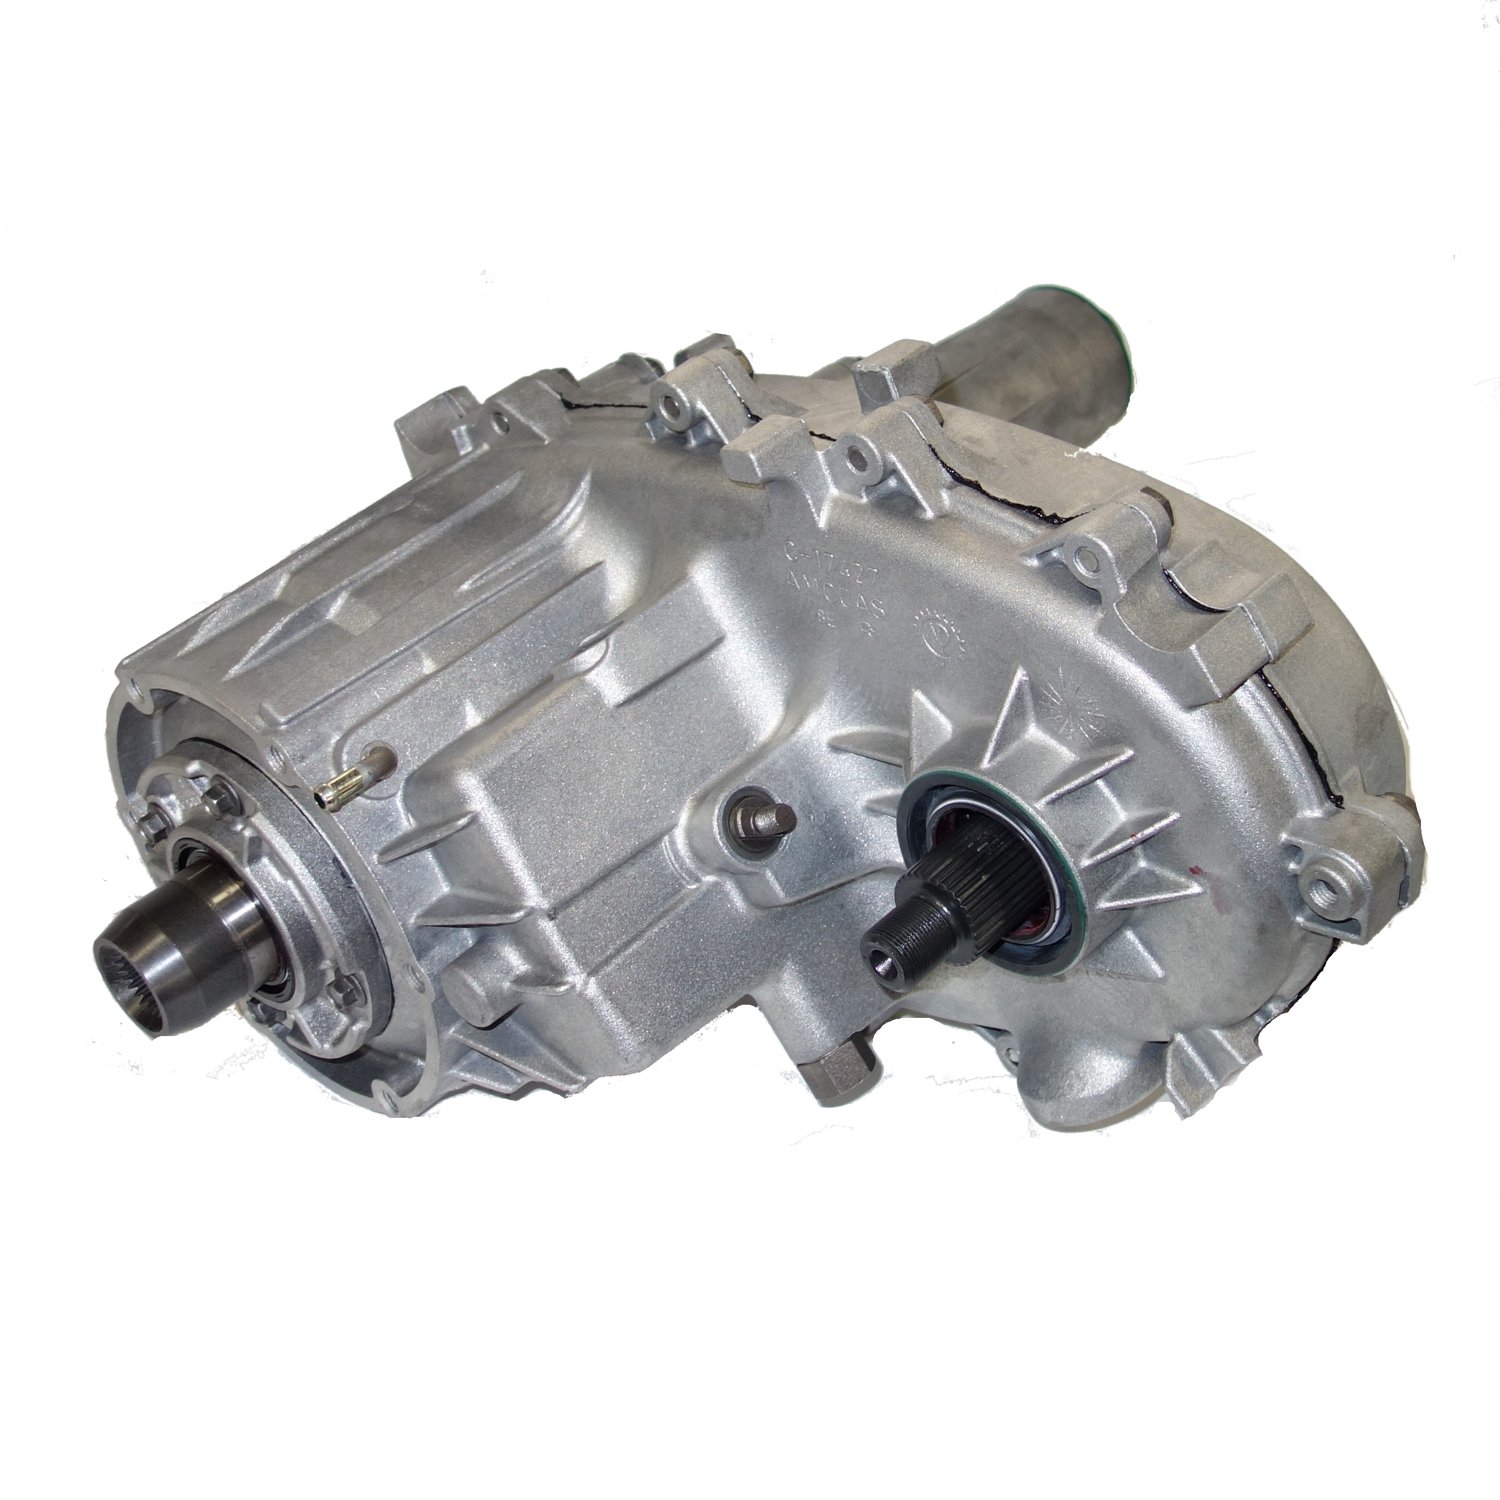 Remanufactured NP241 Transfer Case for GM 95-99